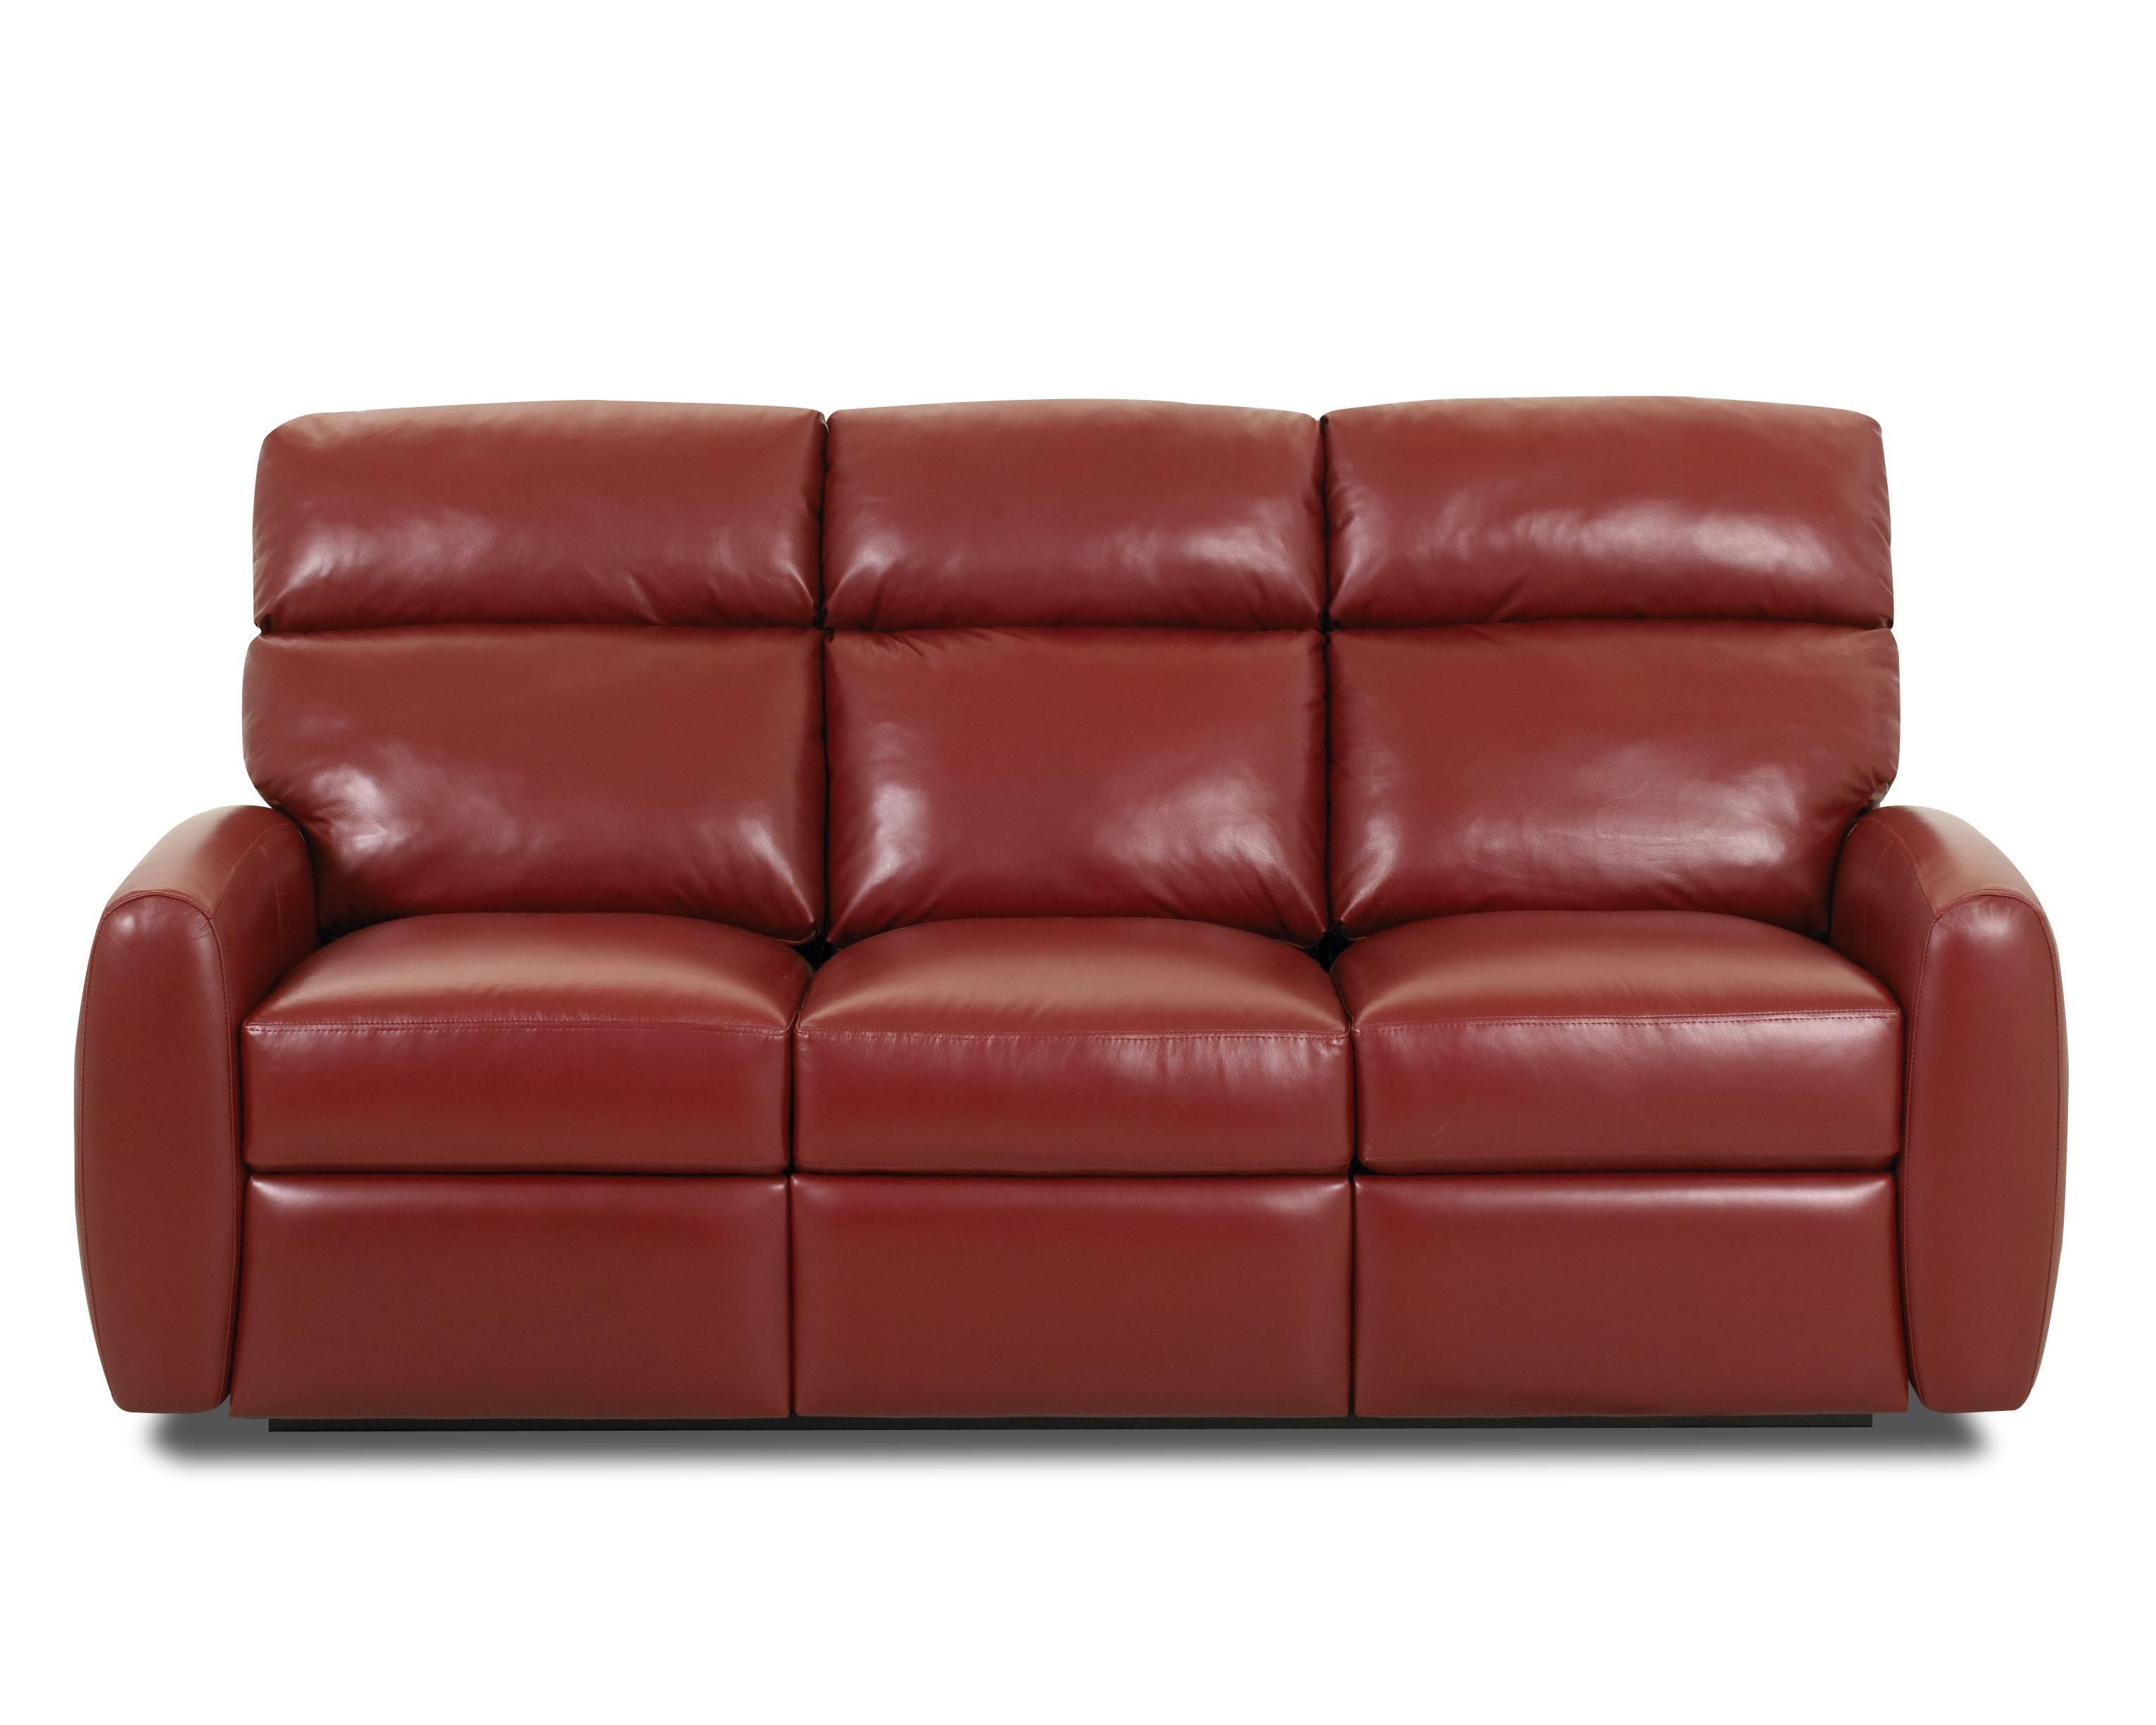 Comfort Design Ventana Red Leather Recliner Sofa | City Creek Furniture Pertaining To Red Leather Reclining Sofas And Loveseats (View 9 of 15)